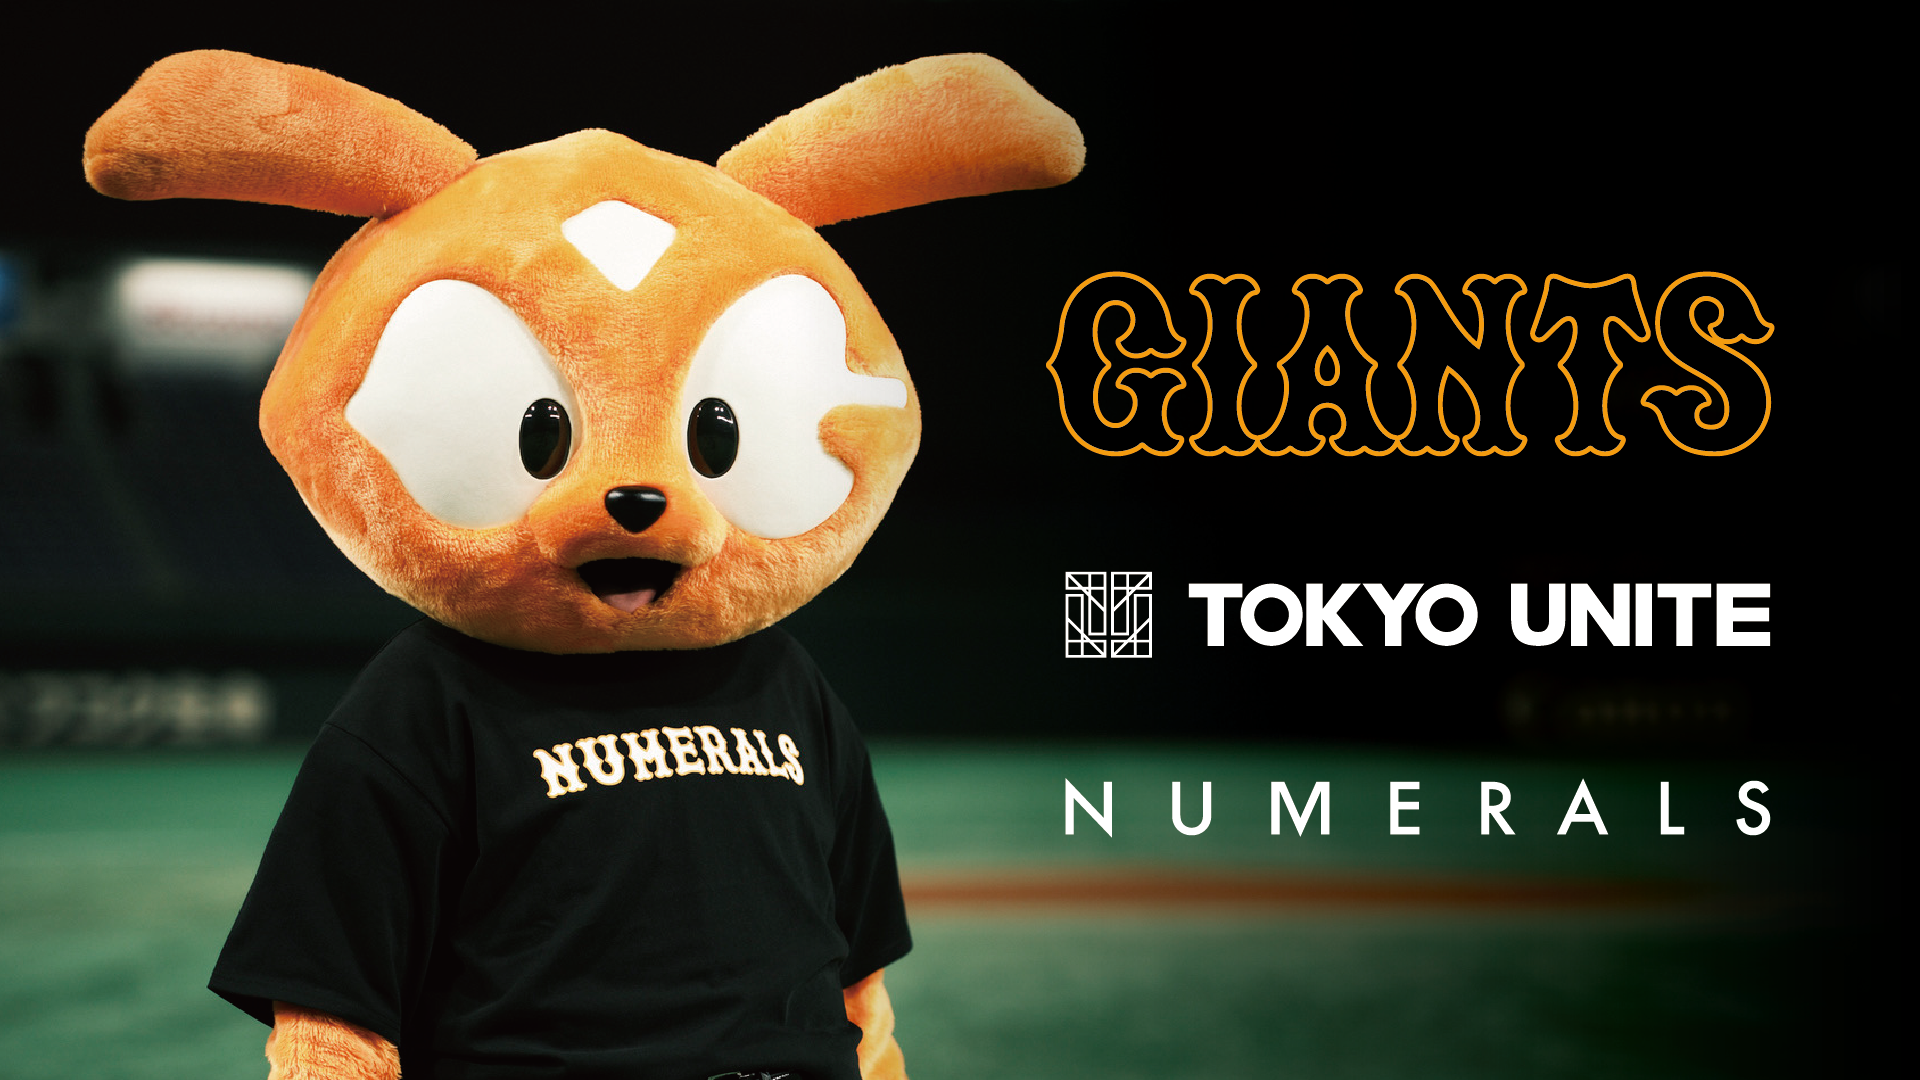 NUMERALS×GIANTS from TOKYO UNITEコラボアイテムを販売